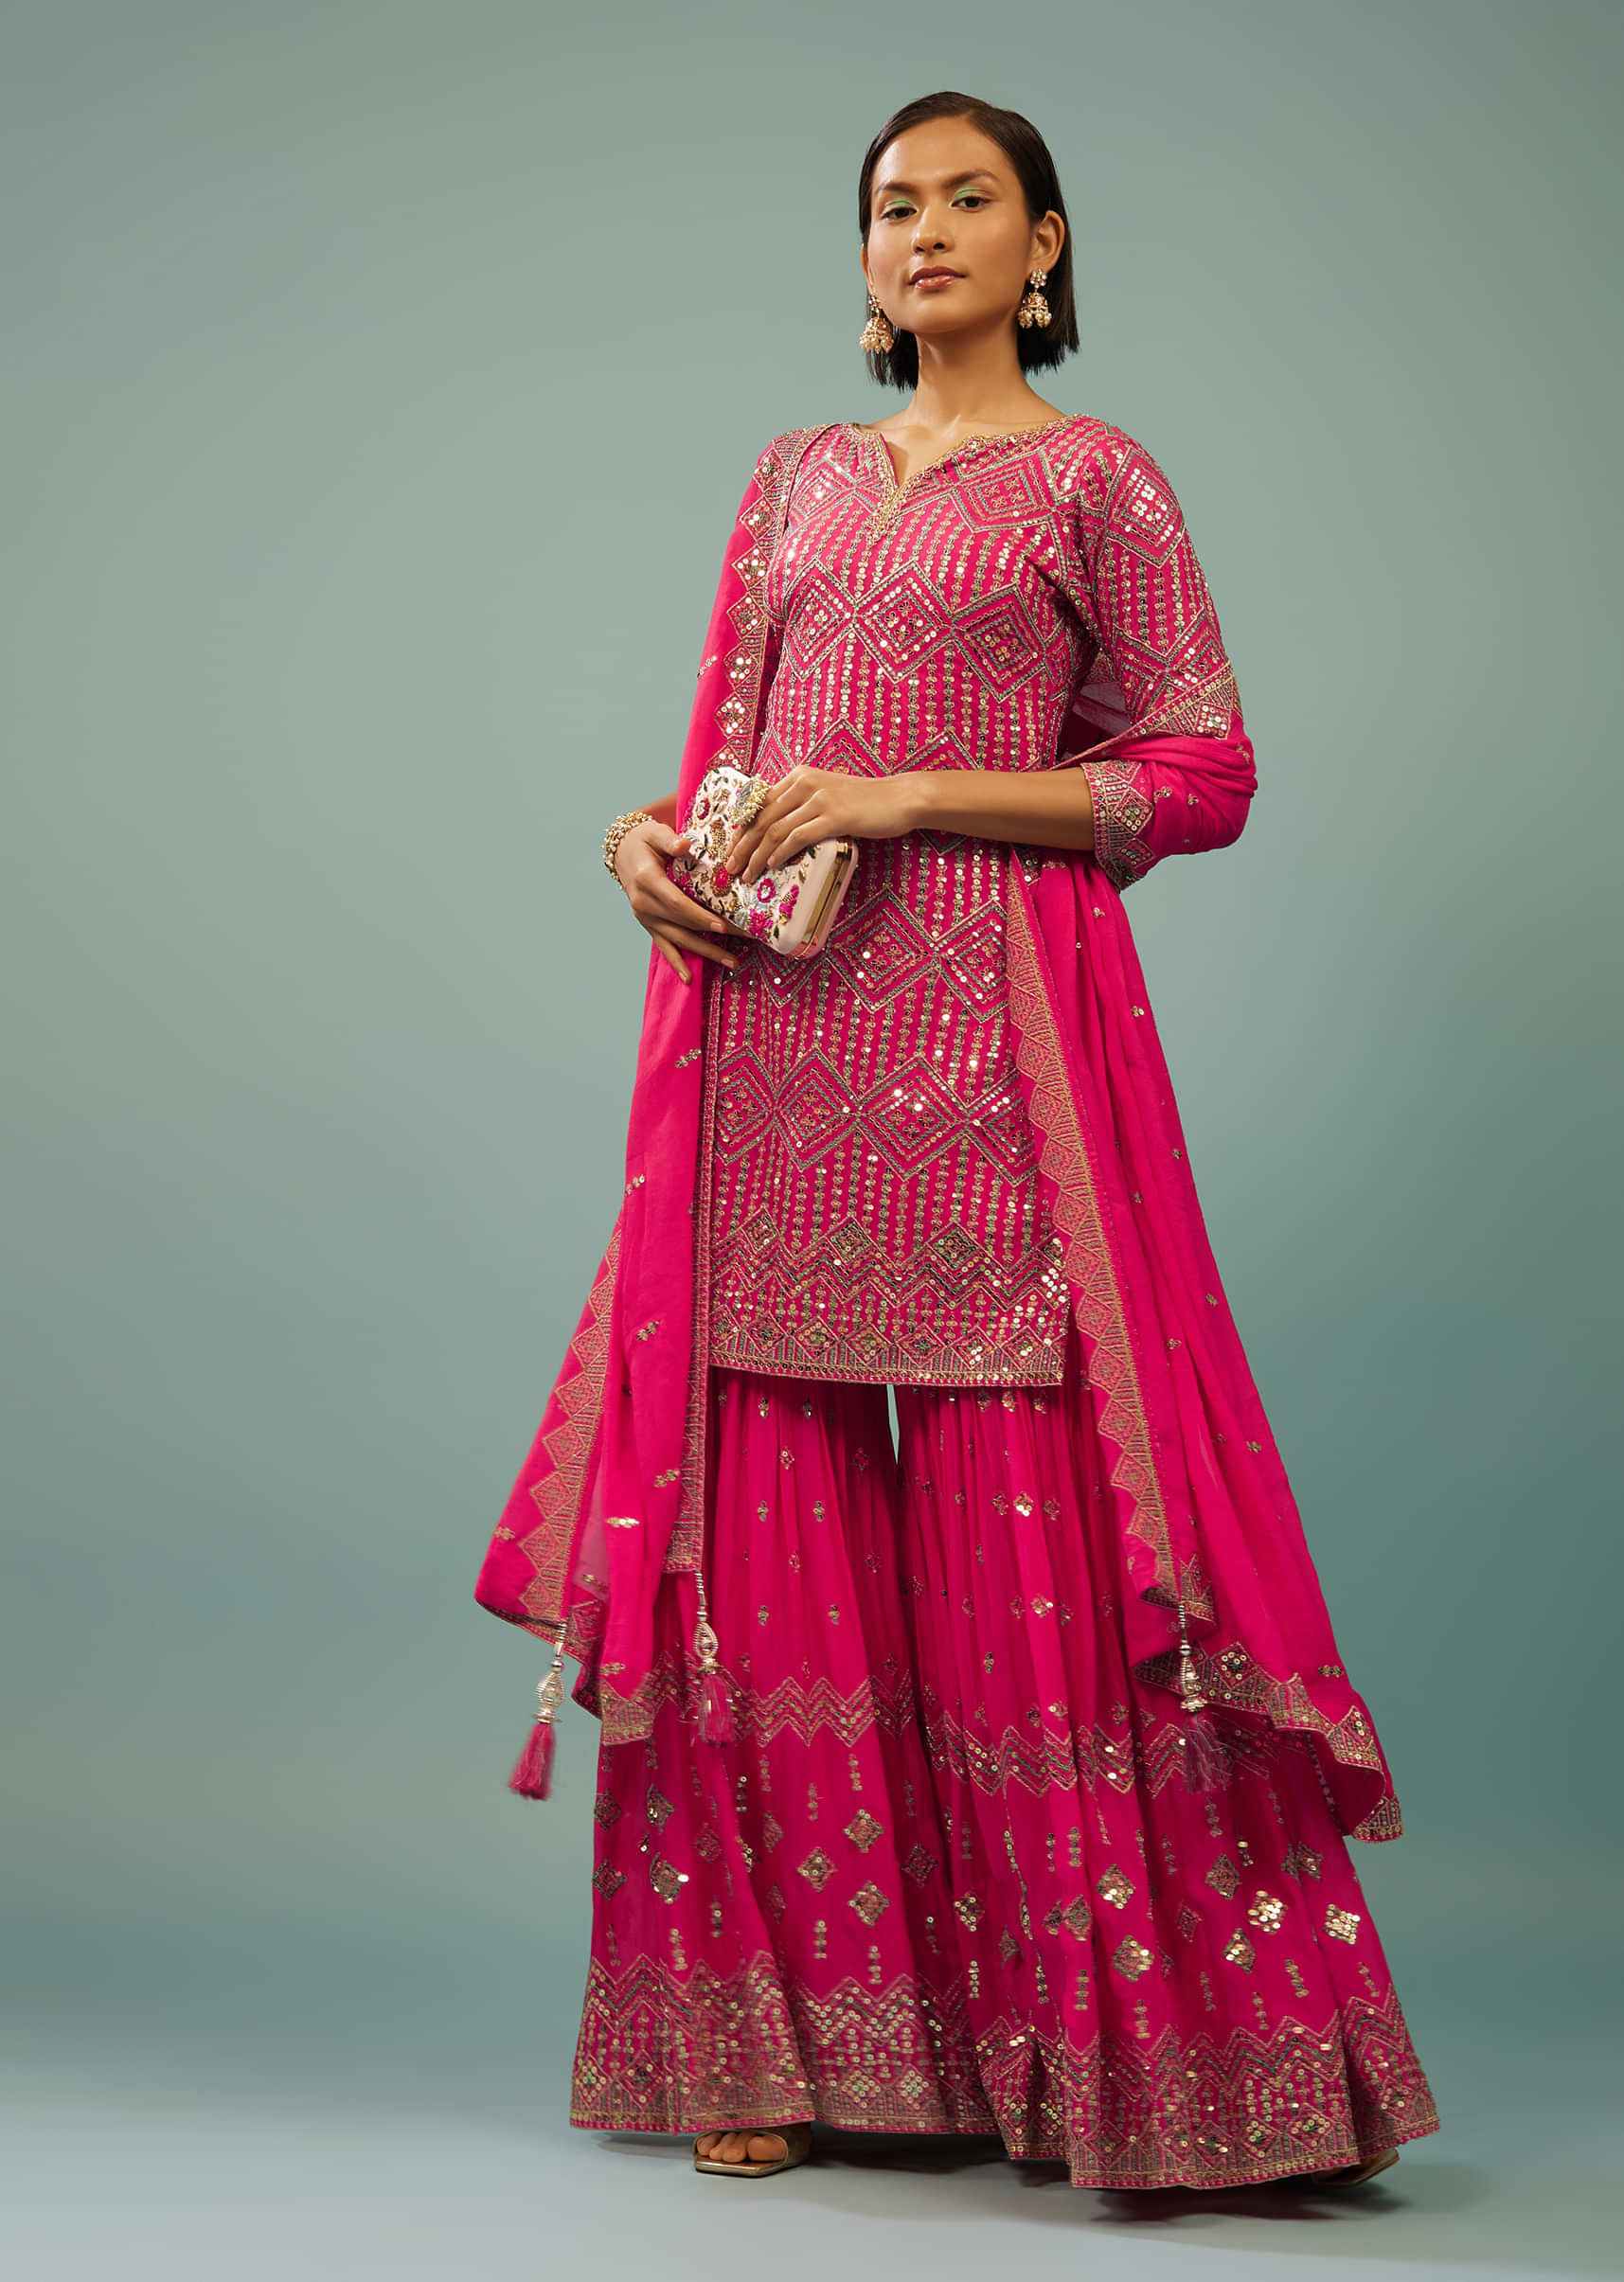 Kalki Beetroot Pink Sharara Suit In Georgette With Embroidery